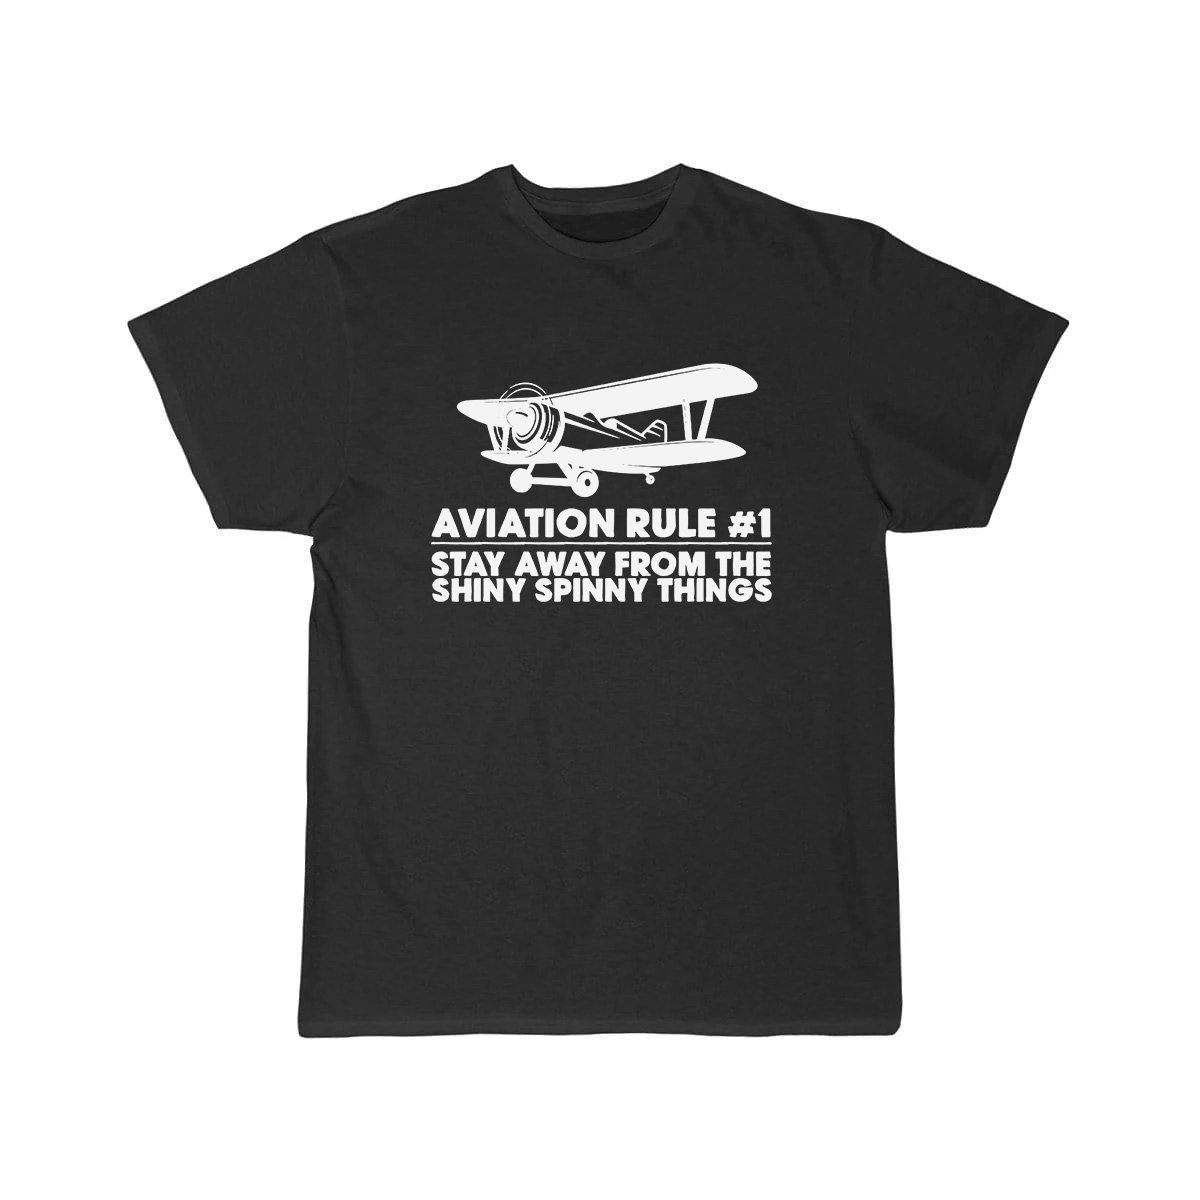 AVIATION RULE #1 STAY ALWAYS FROM THE SHINY SPINNY THINGS T SHIRT THE AV8R